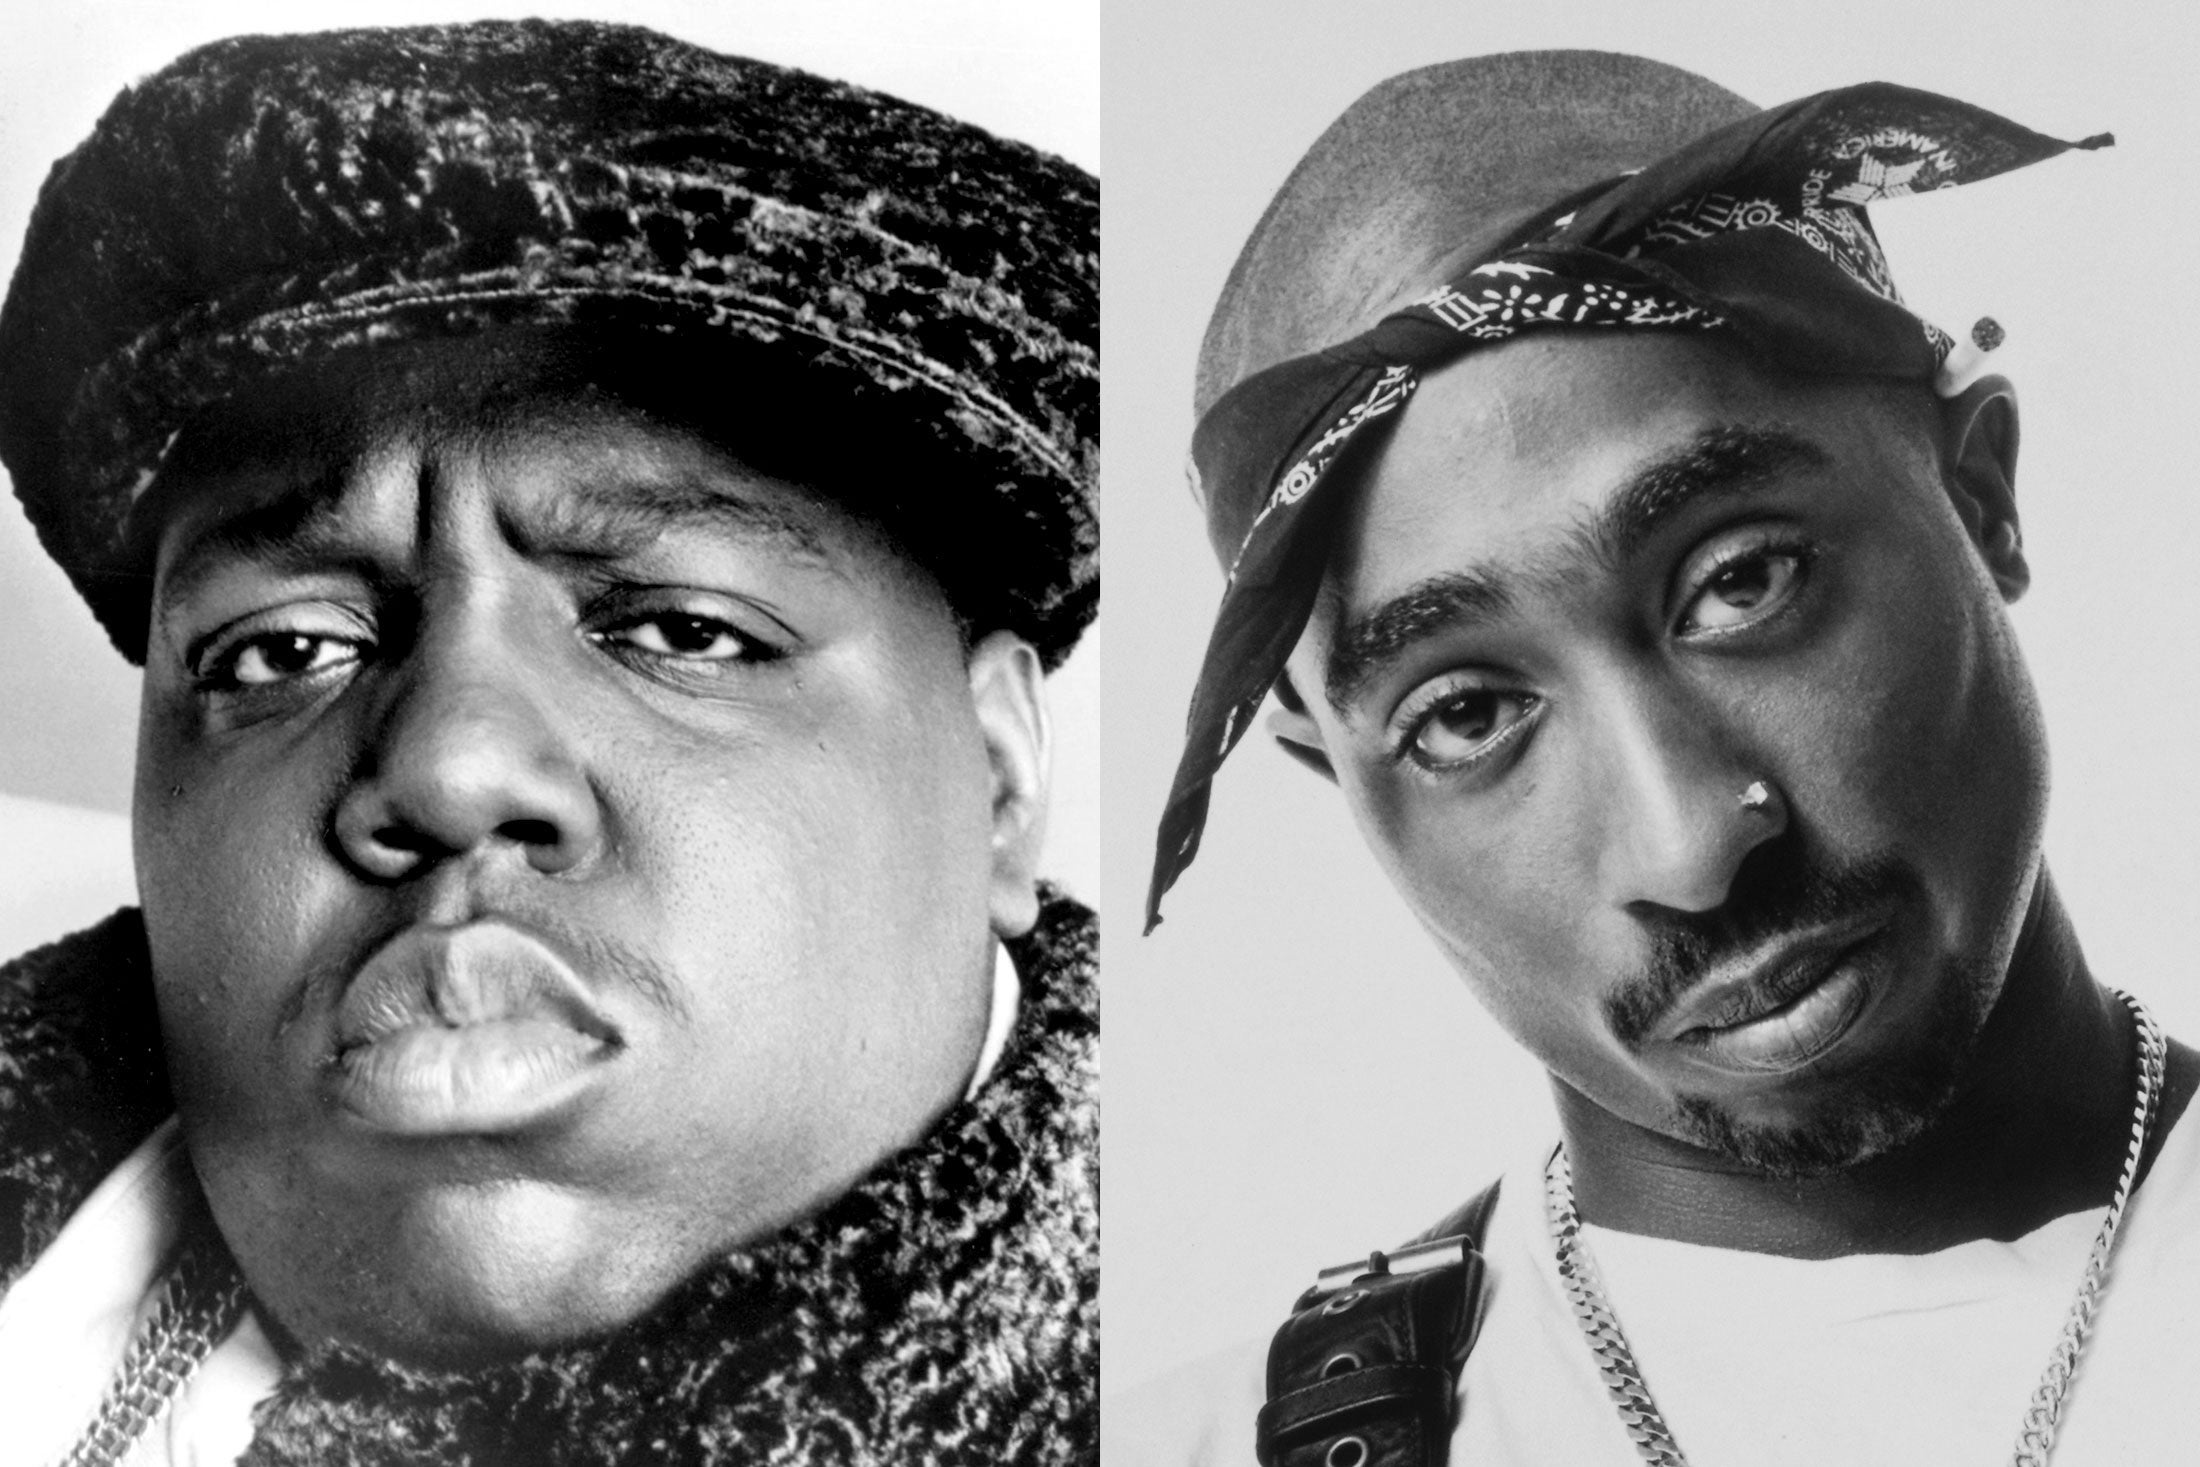 Christopher “Biggie” Wallace and Tupac Shakur.